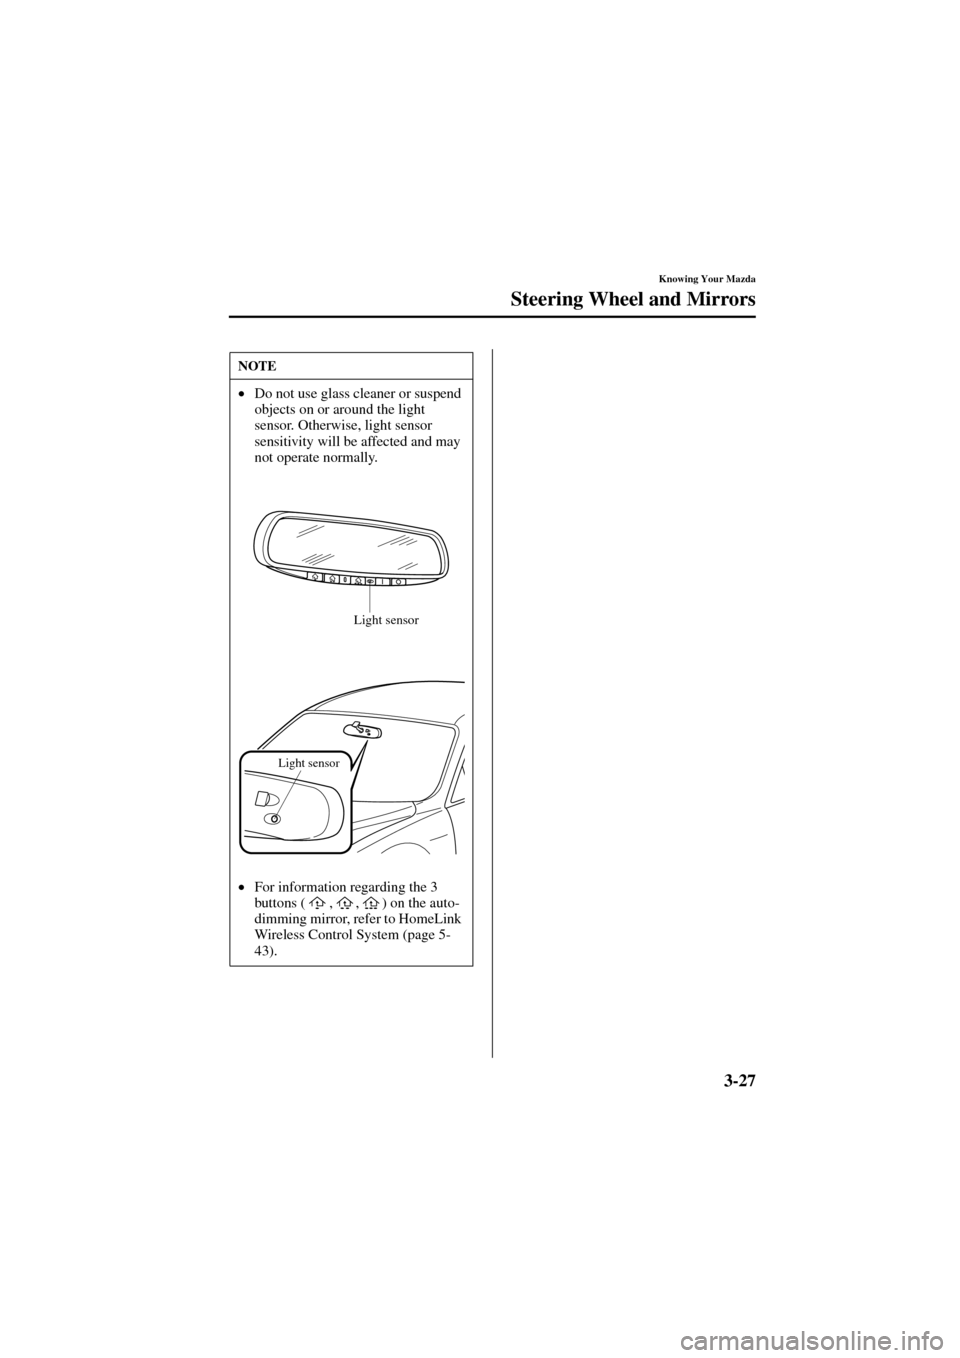 MAZDA MODEL 6 2004   (in English) User Guide 3-27
Knowing Your Mazda
Steering Wheel and Mirrors
Form No. 8R29-EA-02I
NOTE
•
Do not use glass cleaner or suspend 
objects on or around the light 
sensor. Otherwise, light sensor 
sensitivity will 